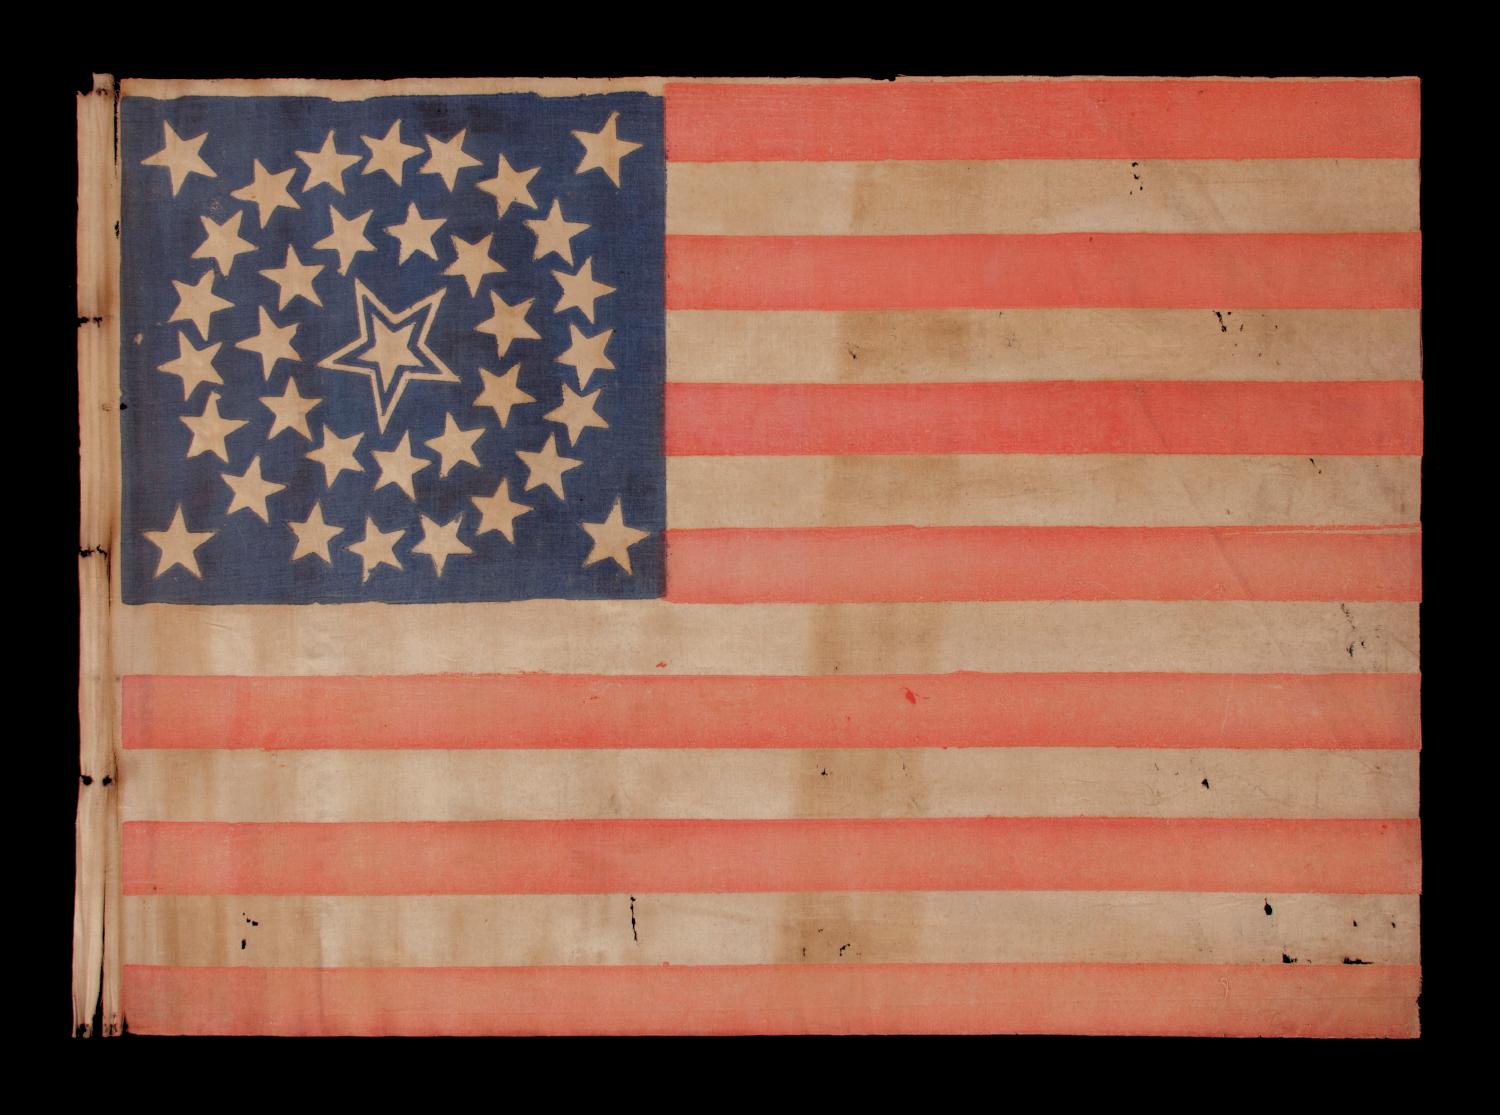 35 STARS IN A MEDALLION CONFIGURATION WITH A LARGE, HALOED CENTER STAR, CIVIL WAR PERIOD, WEST VIRGINIA STATEHOOD, 1863-65 

35 star American national parade flag, printed on cotton. The stars are arranged in what is known as a medallion